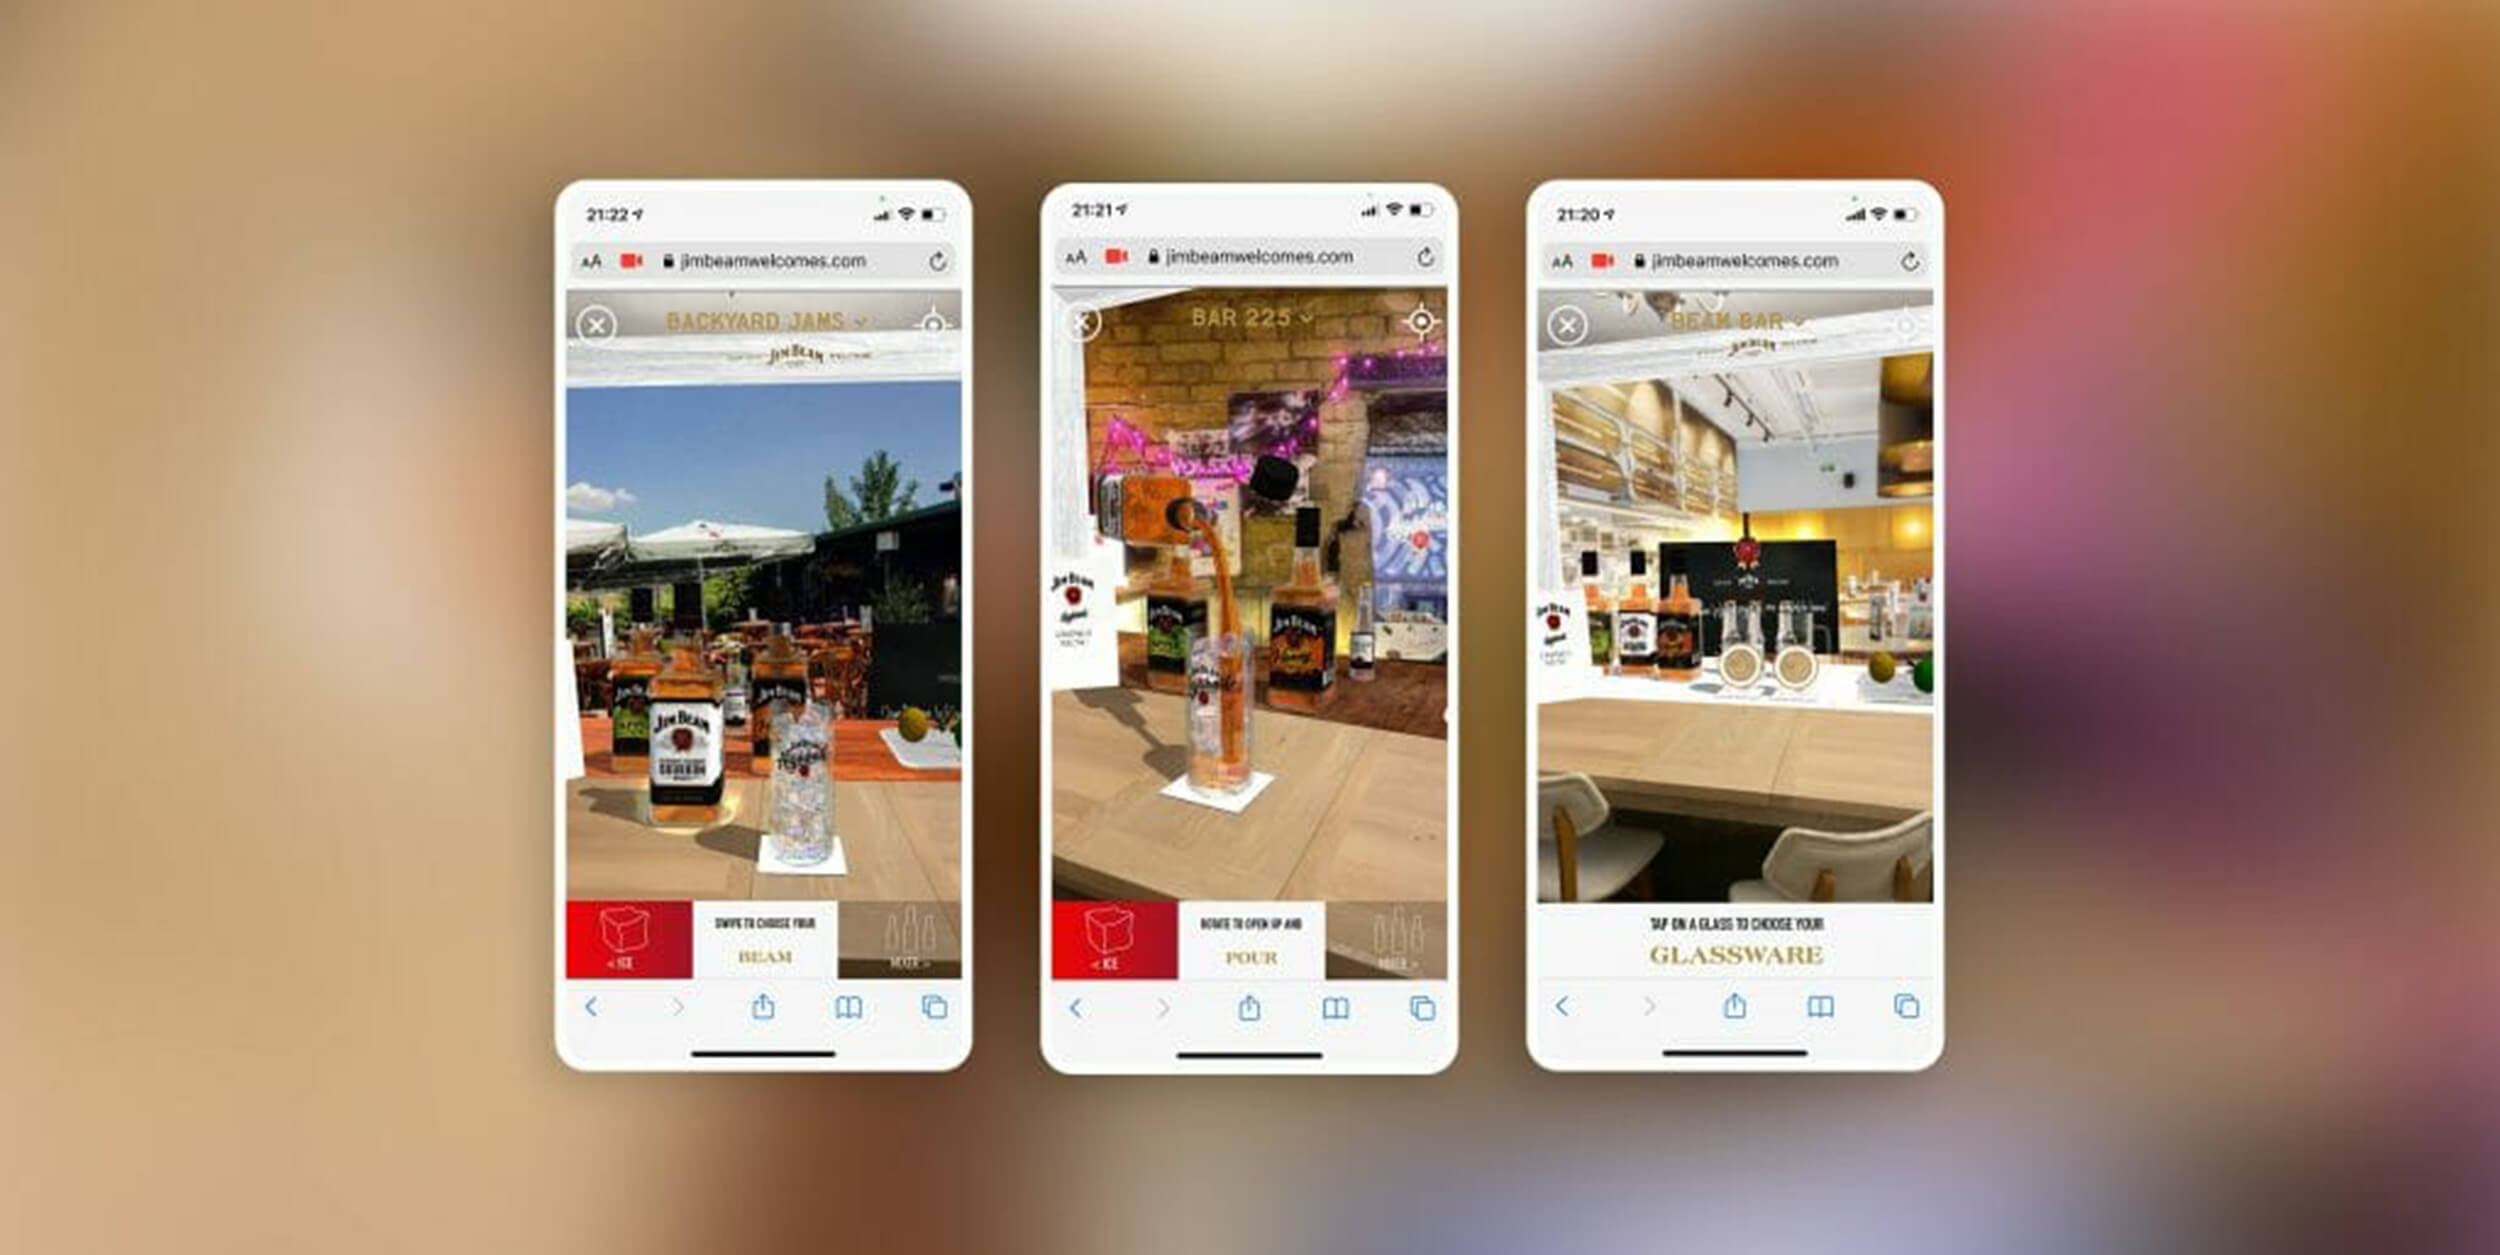 Augmented Reality for Beer, Wine, and Spirits enhances the user experience and delivers value